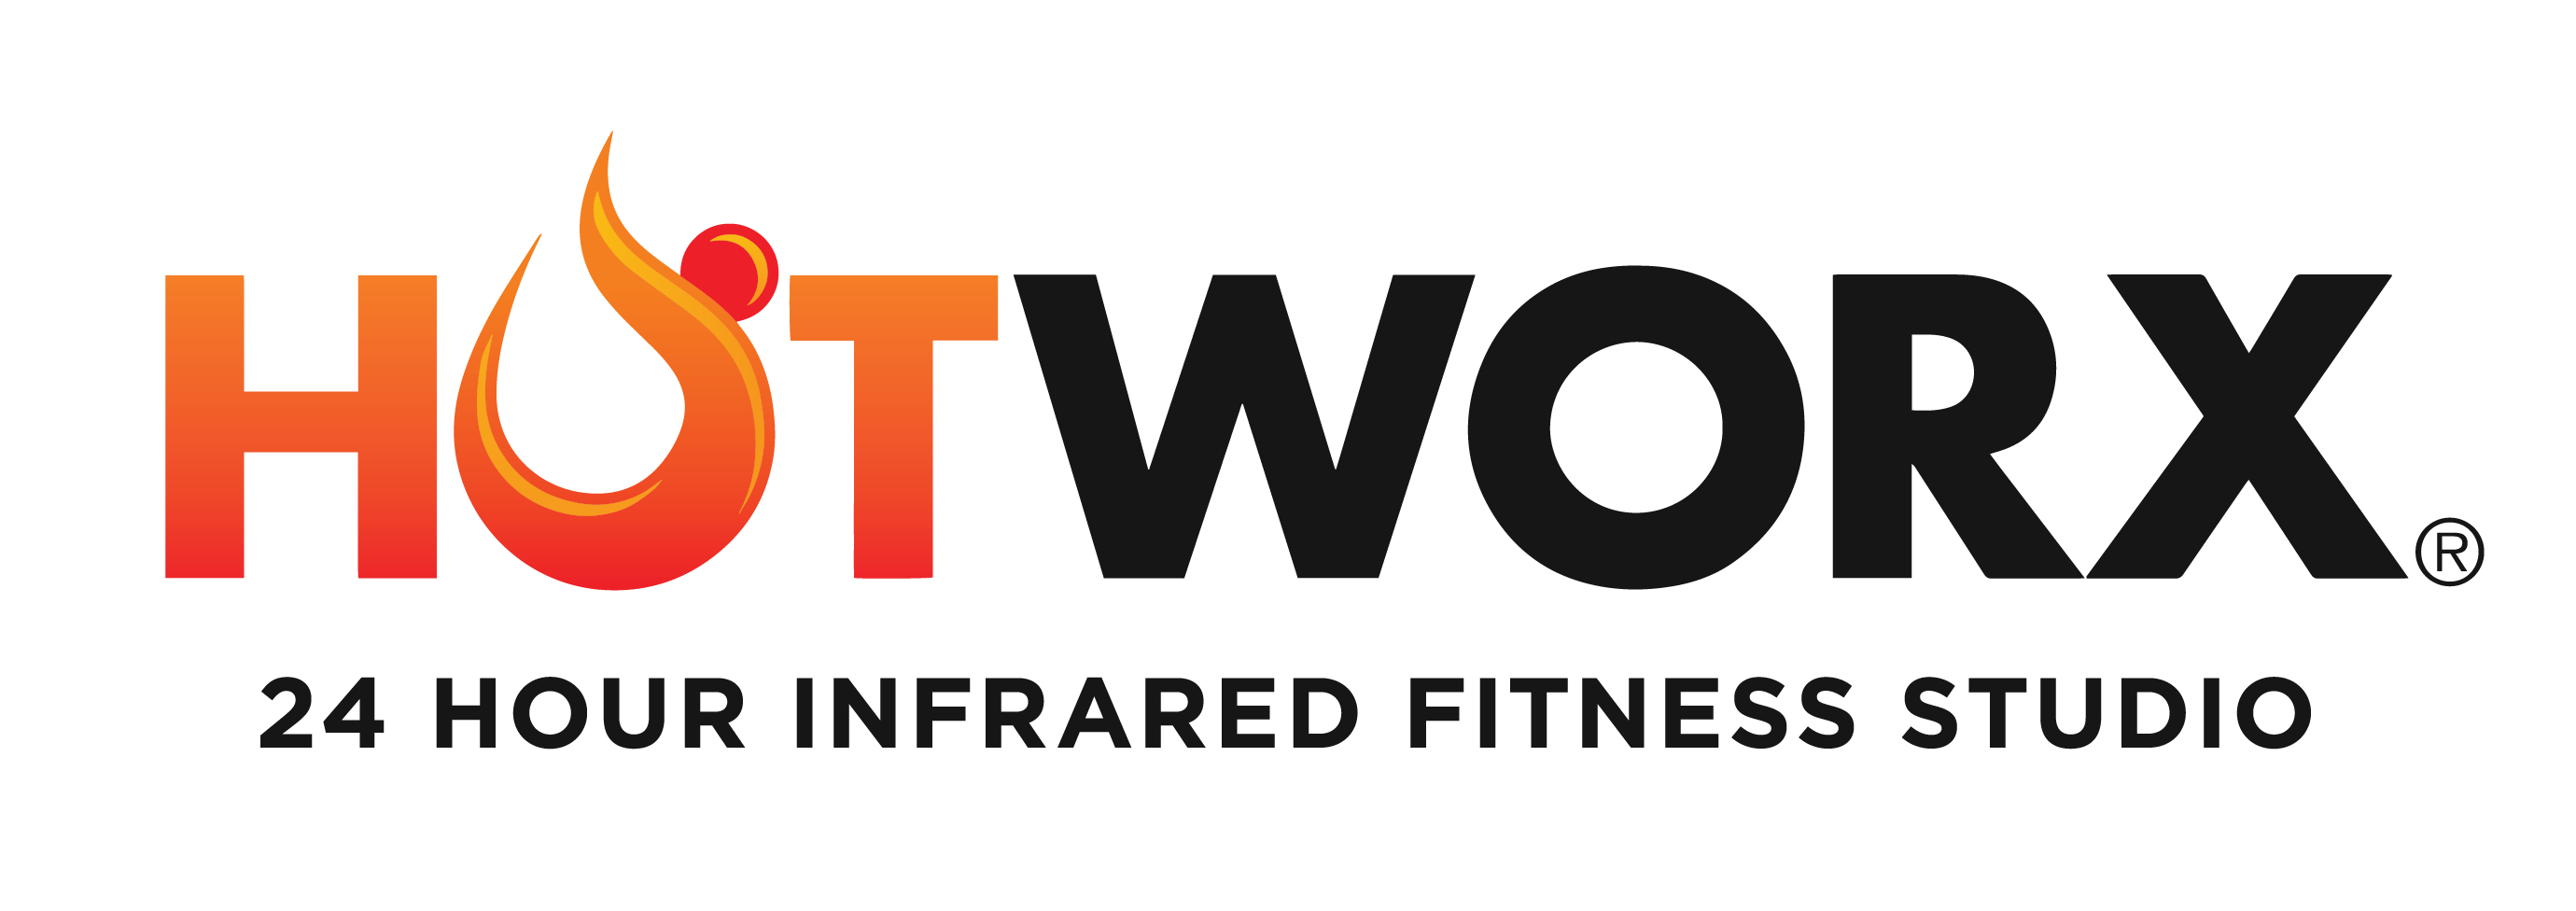 There are two types of sessions at HOTWORX; Isomentric sessions & HIIT, Gym Equipment